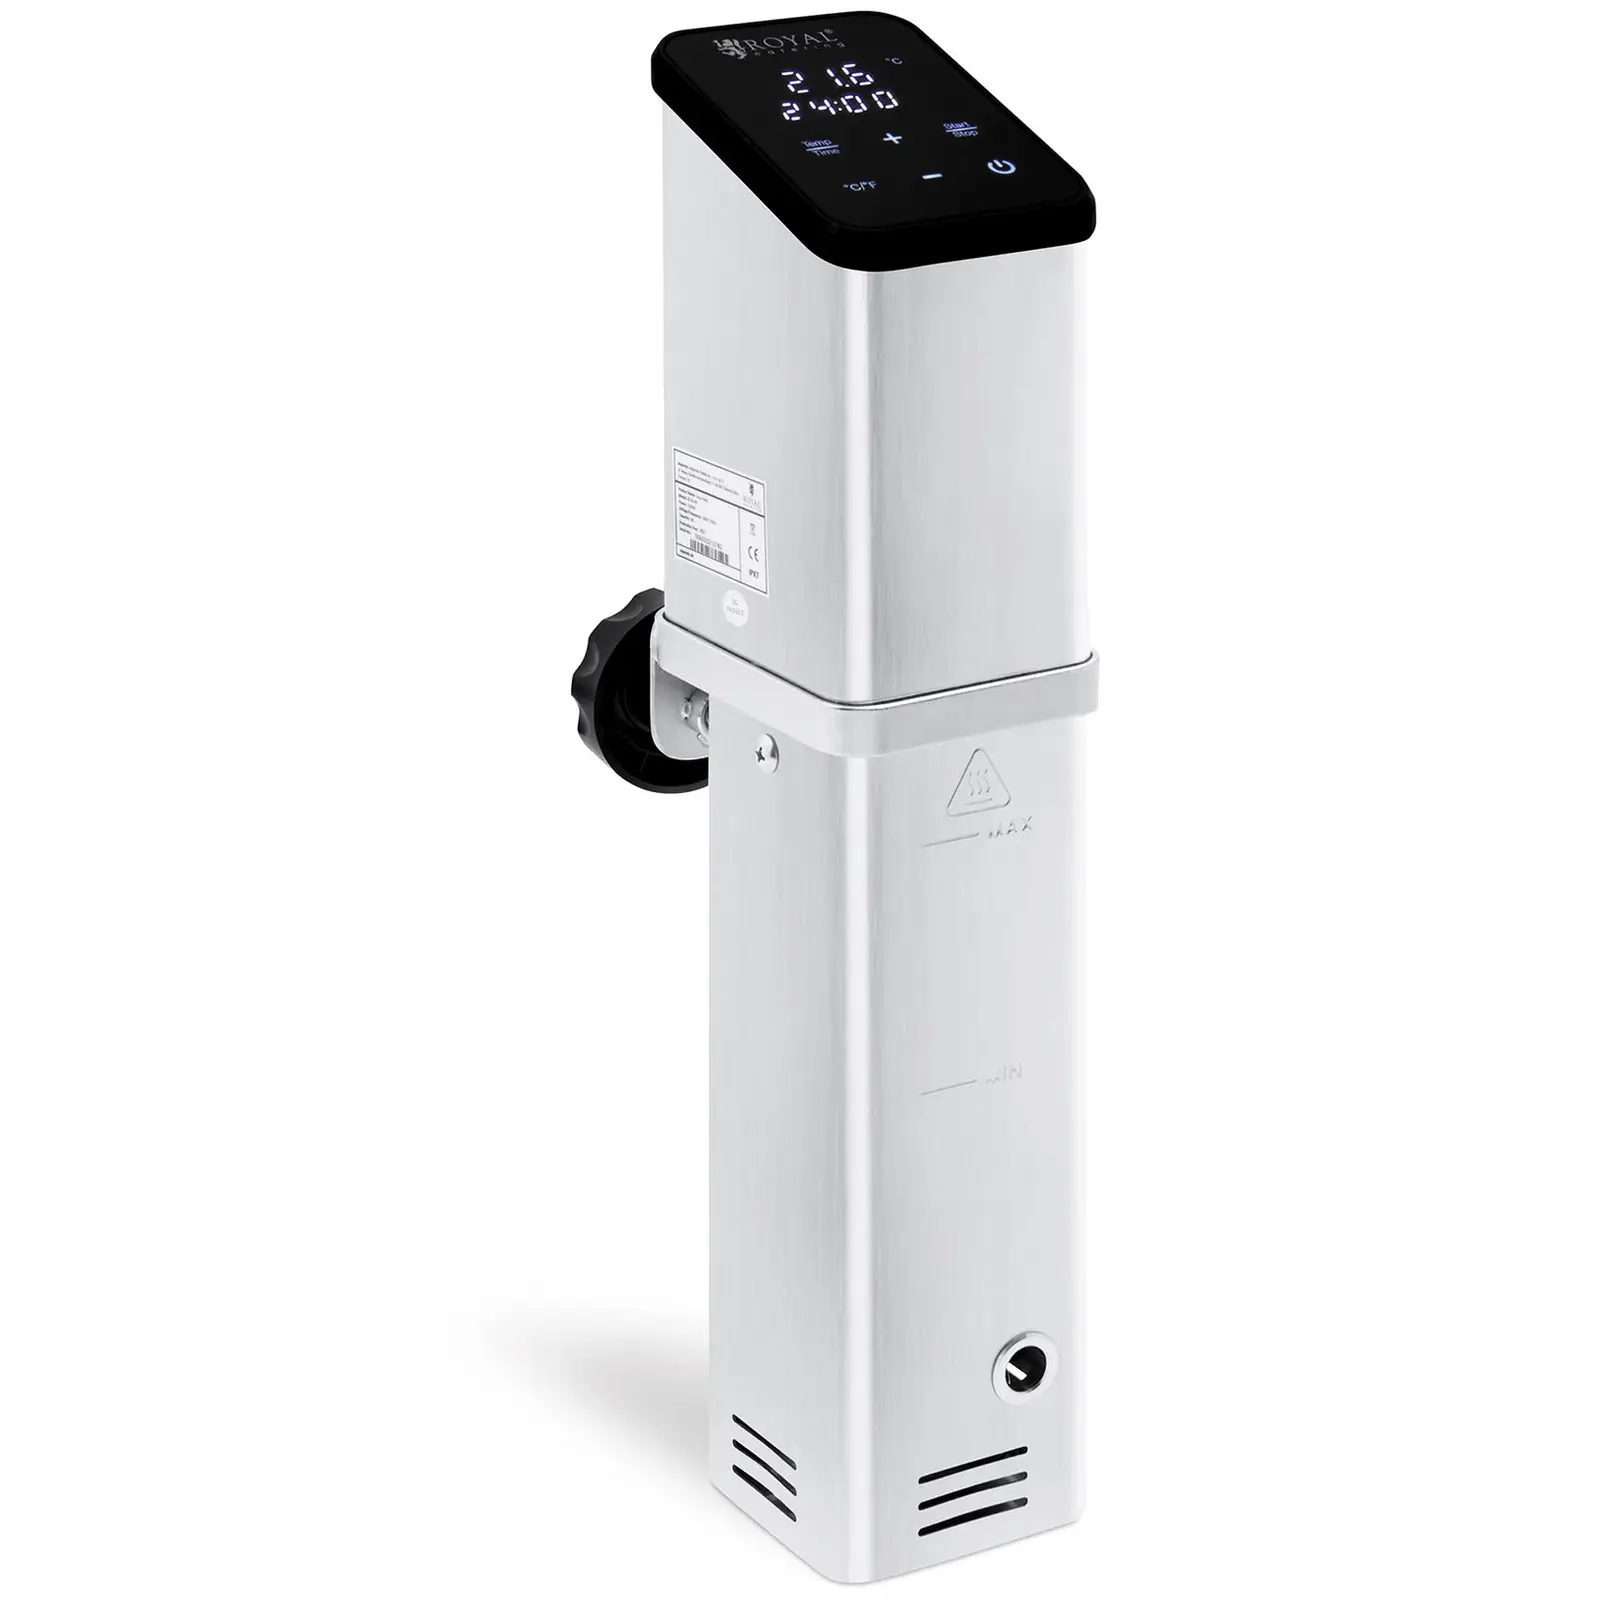 Immersion Circulator - 1,500 W - Royal Catering - 30 L